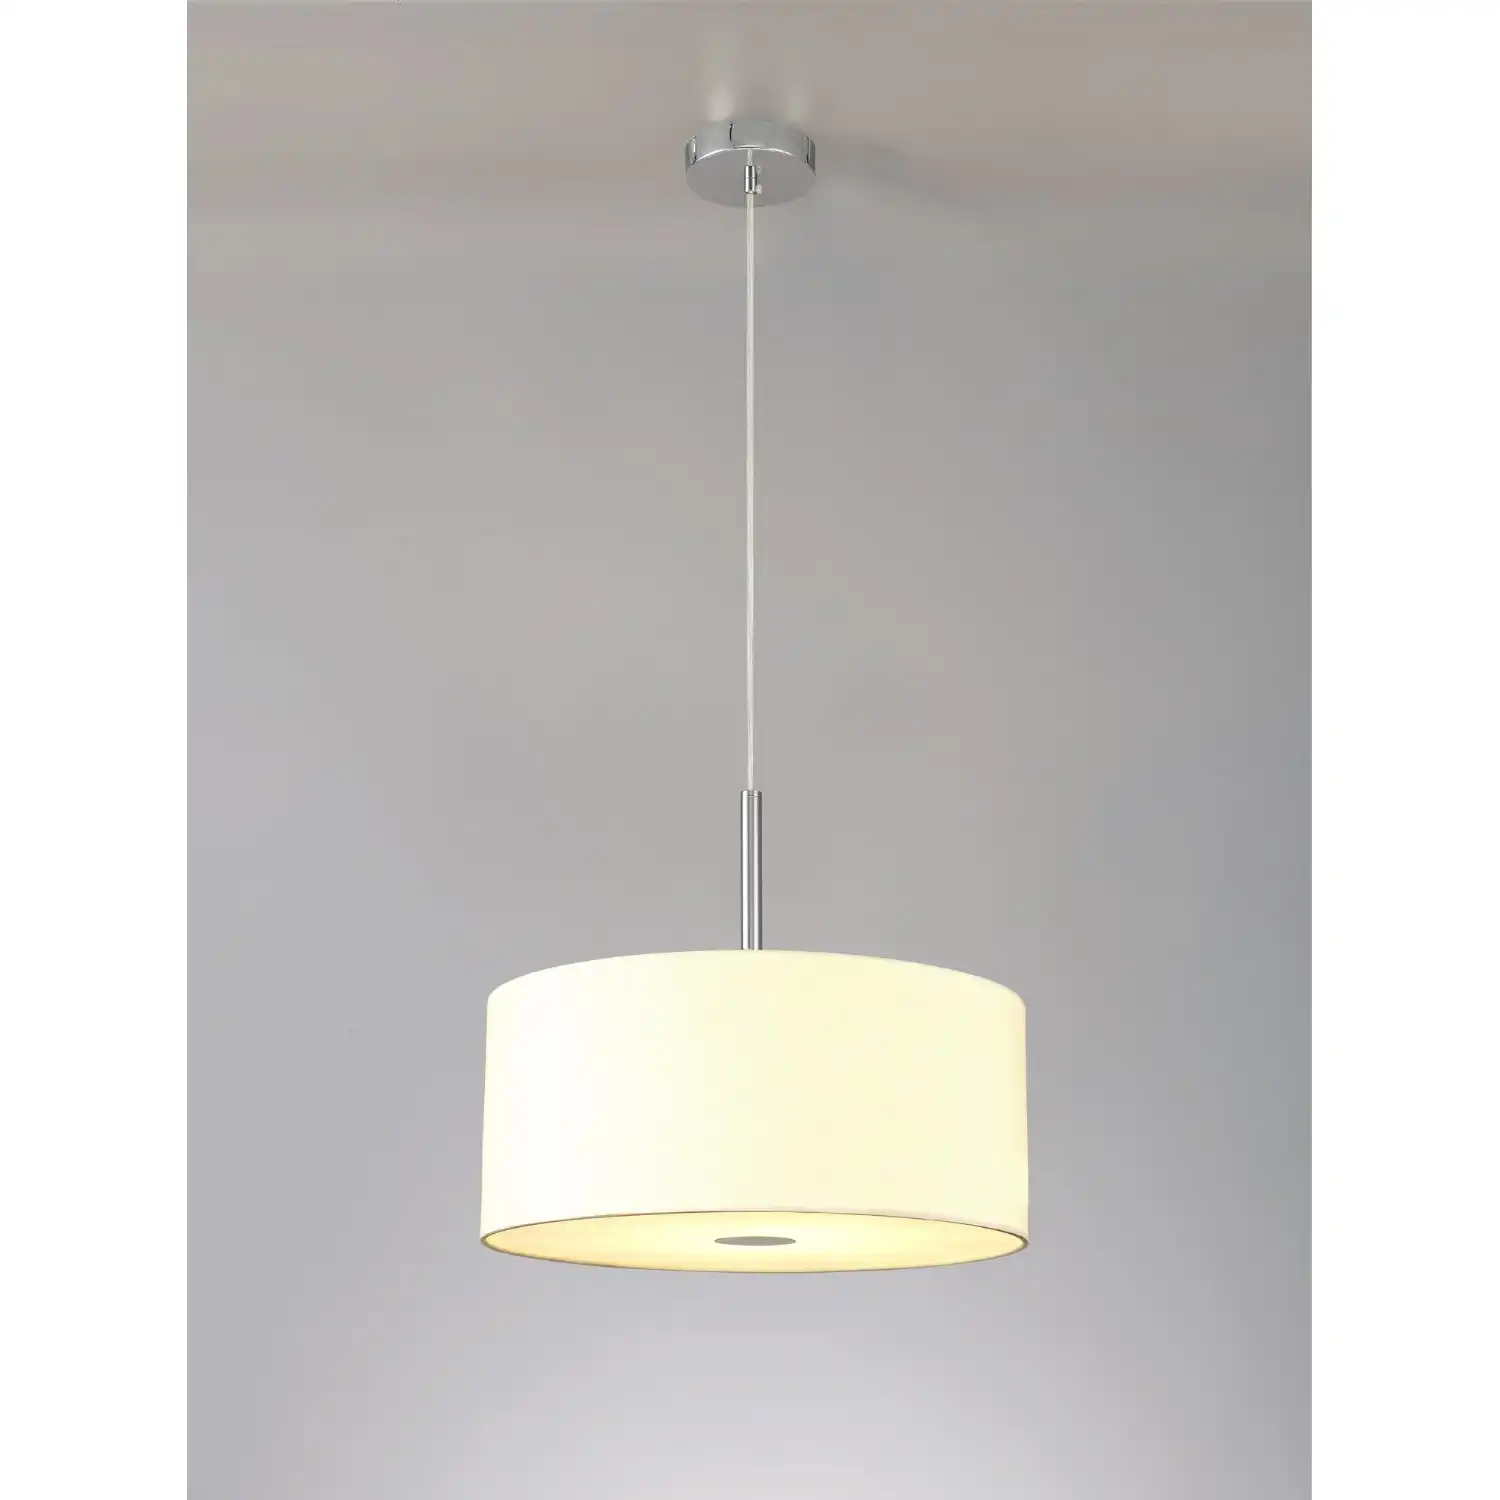 Baymont Polished Chrome 3m 5 Light E27 Single Pendant c w 400mm Faux Silk Shade, Ivory Pearl White Laminate And 400mm Frosted PC Acrylic Diffuser